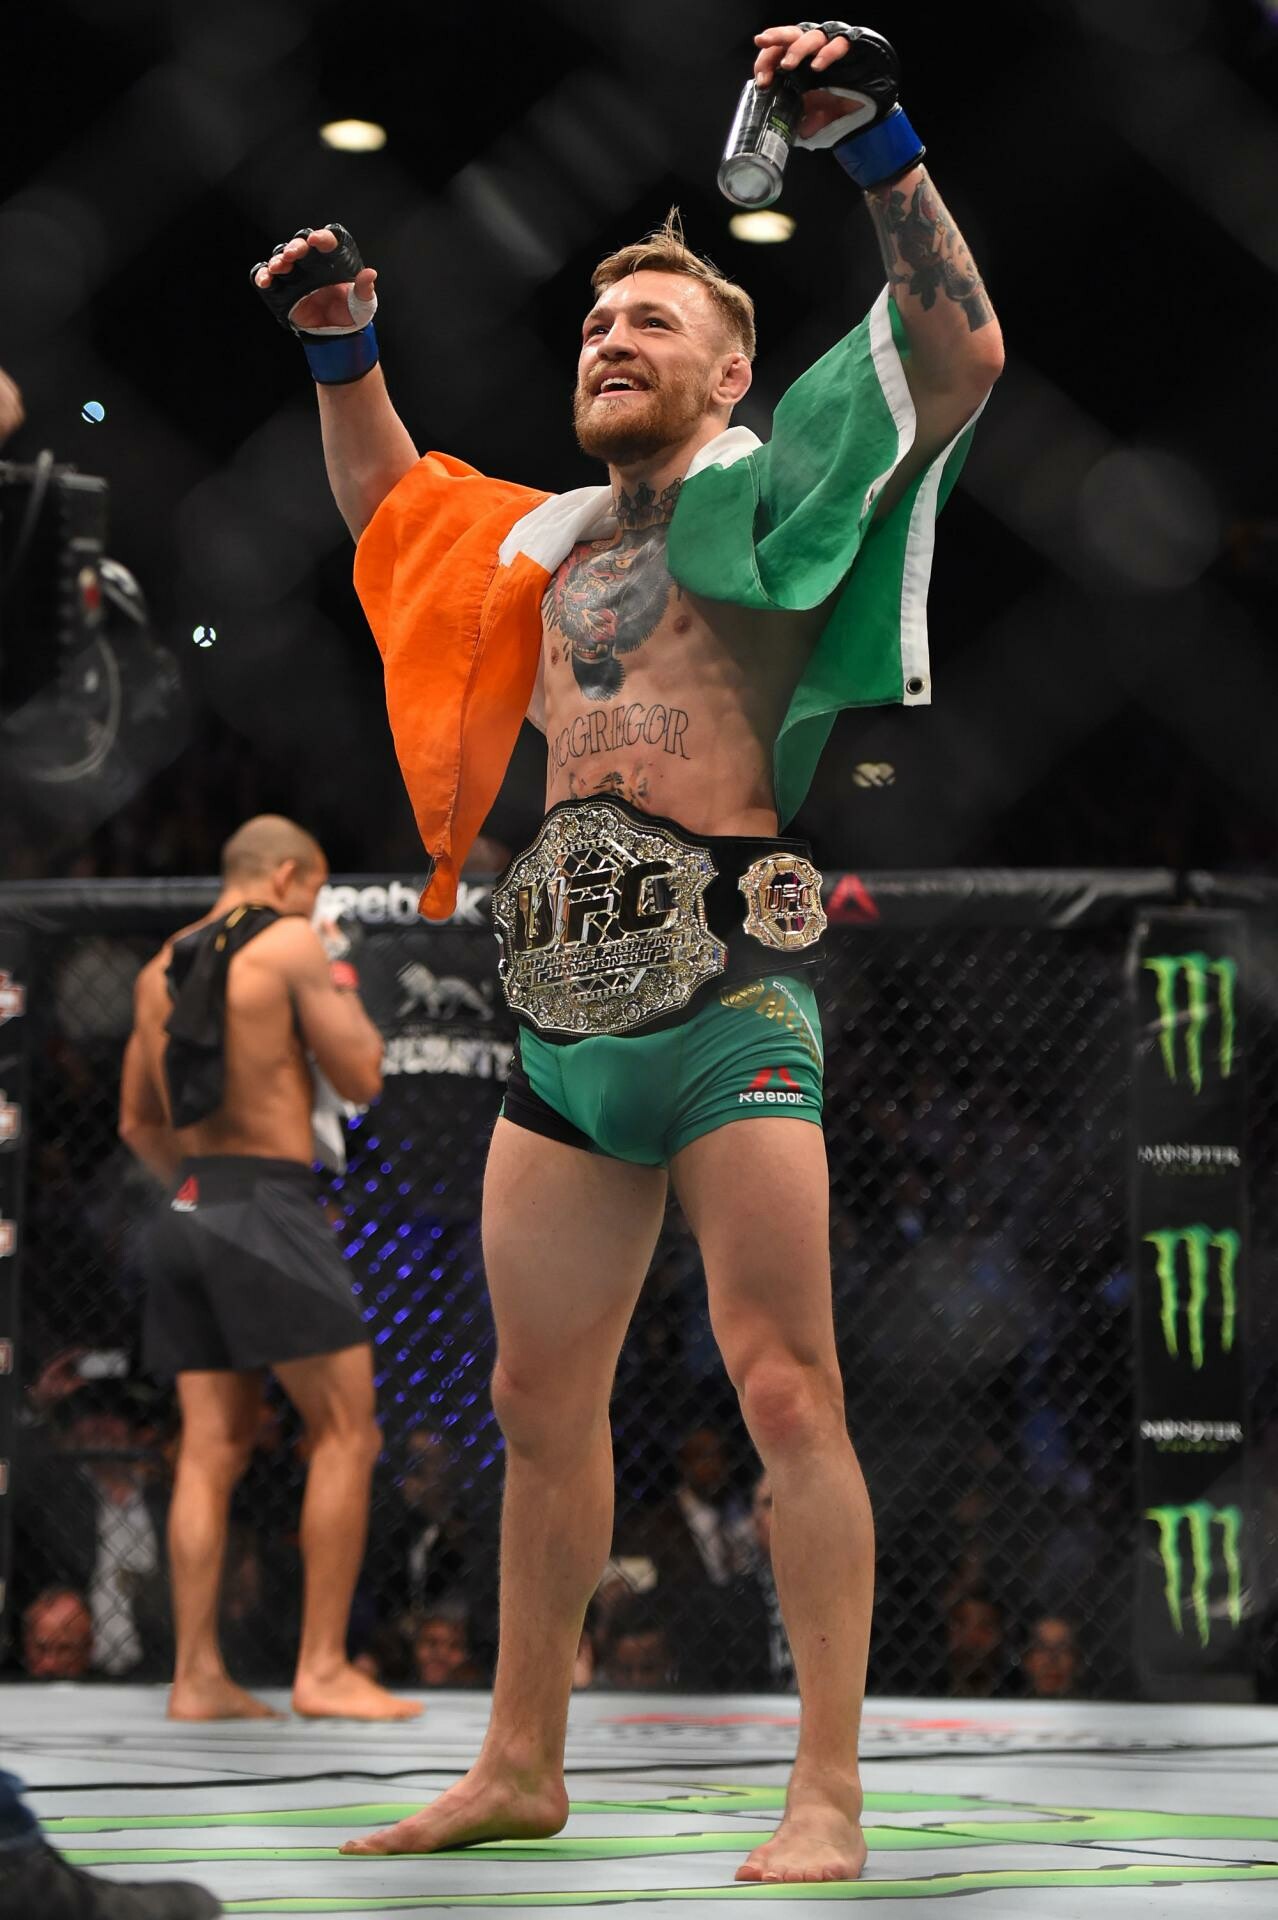 HD wallpaper, Iphone Hd Conor Mcgregor Wallpaper, Sports Wallpapers, 1280X1920 Hd Phone, Ufc Fighter, Strong Presence, Conor Mcgregor